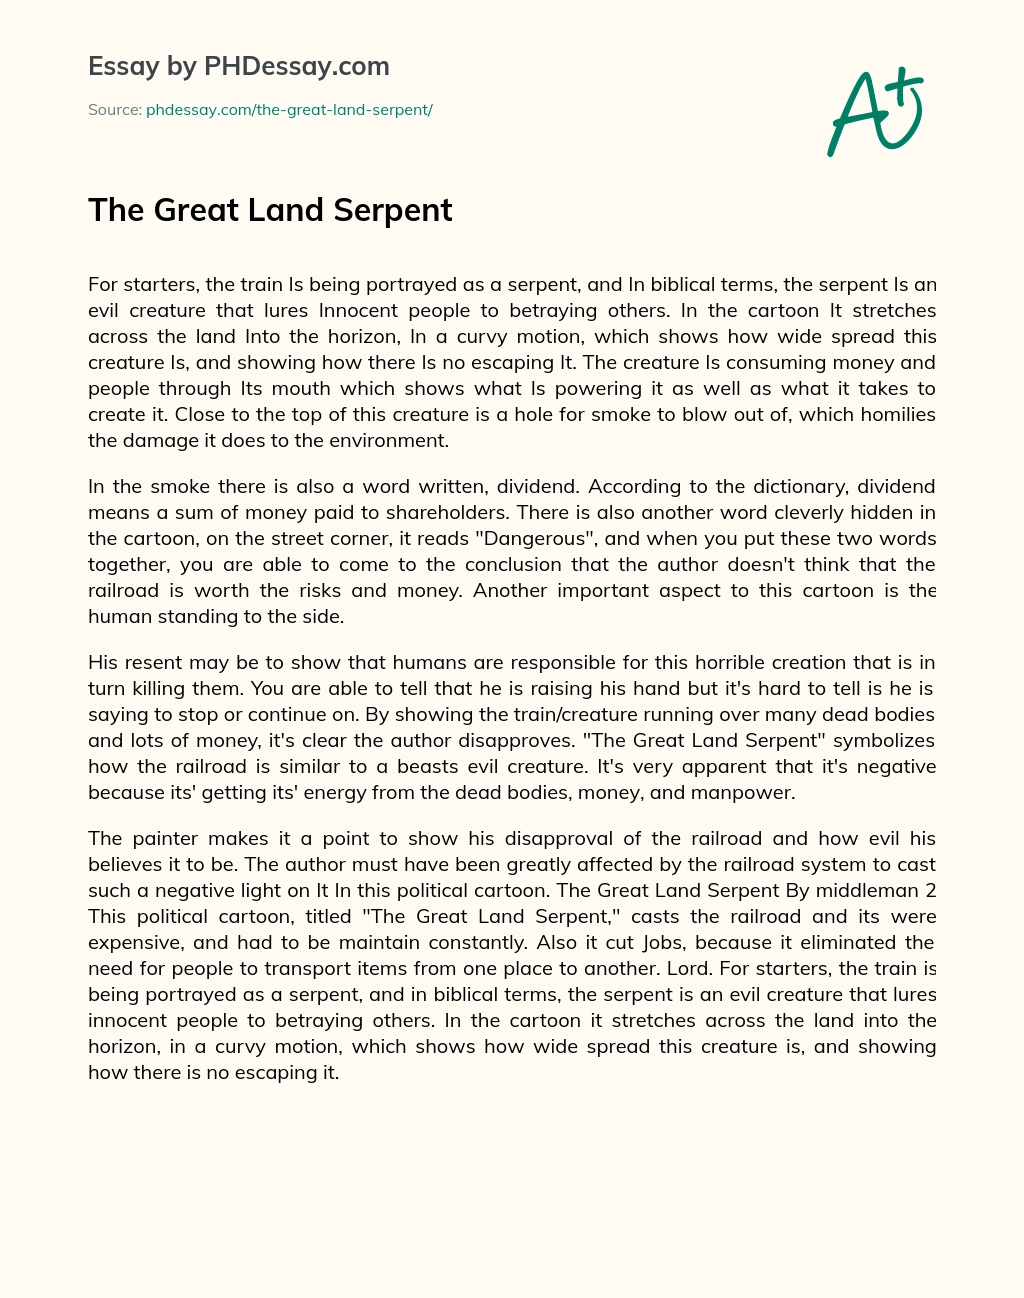 The Great Land Serpent essay